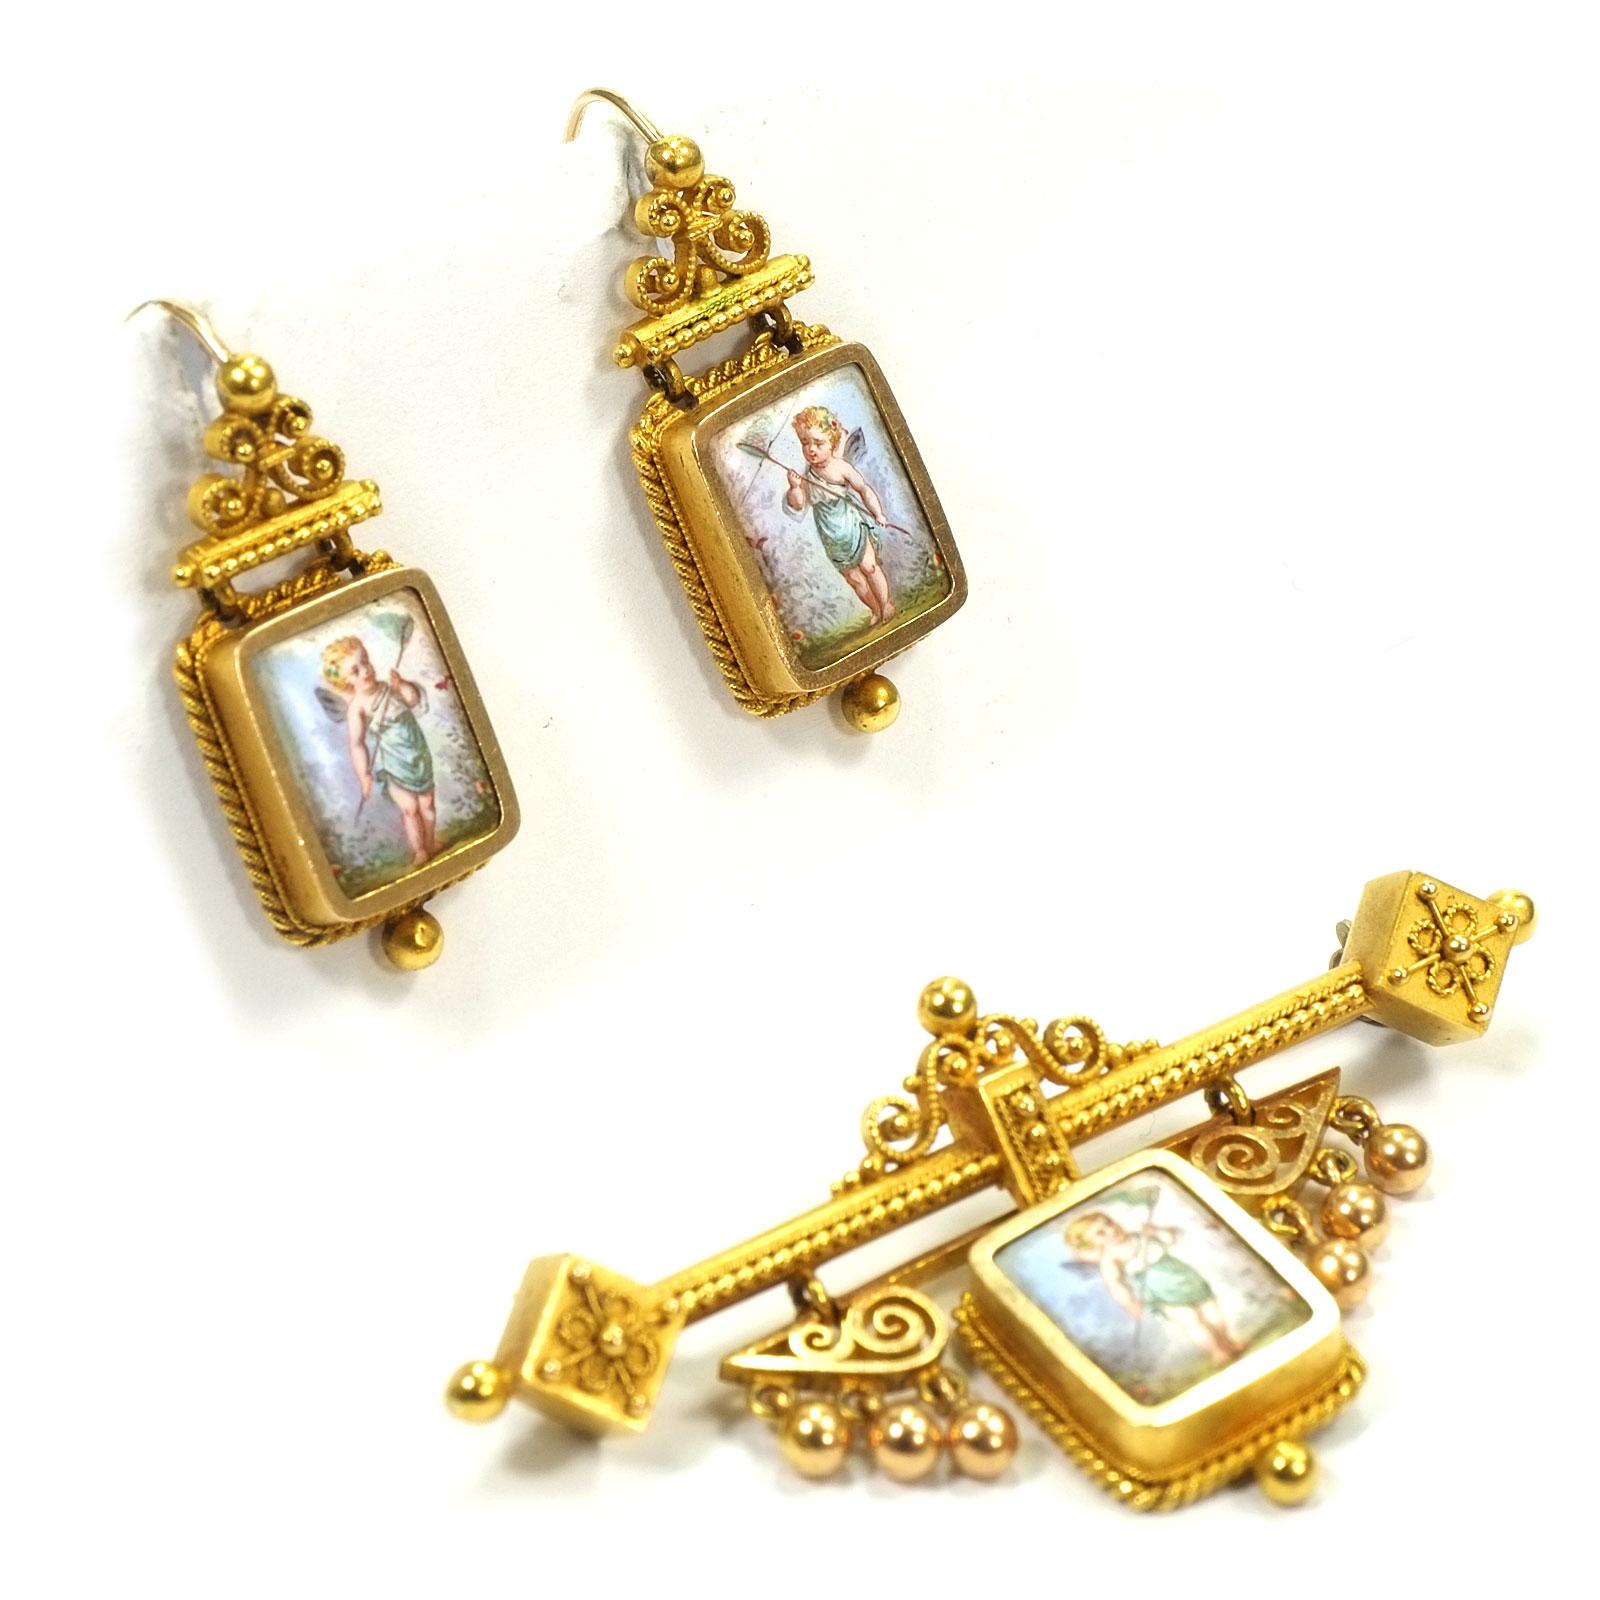 Etruscan Revival Swiss Gold Demi Parure Earrings and Brooch with Miniature Painting, circa 1870